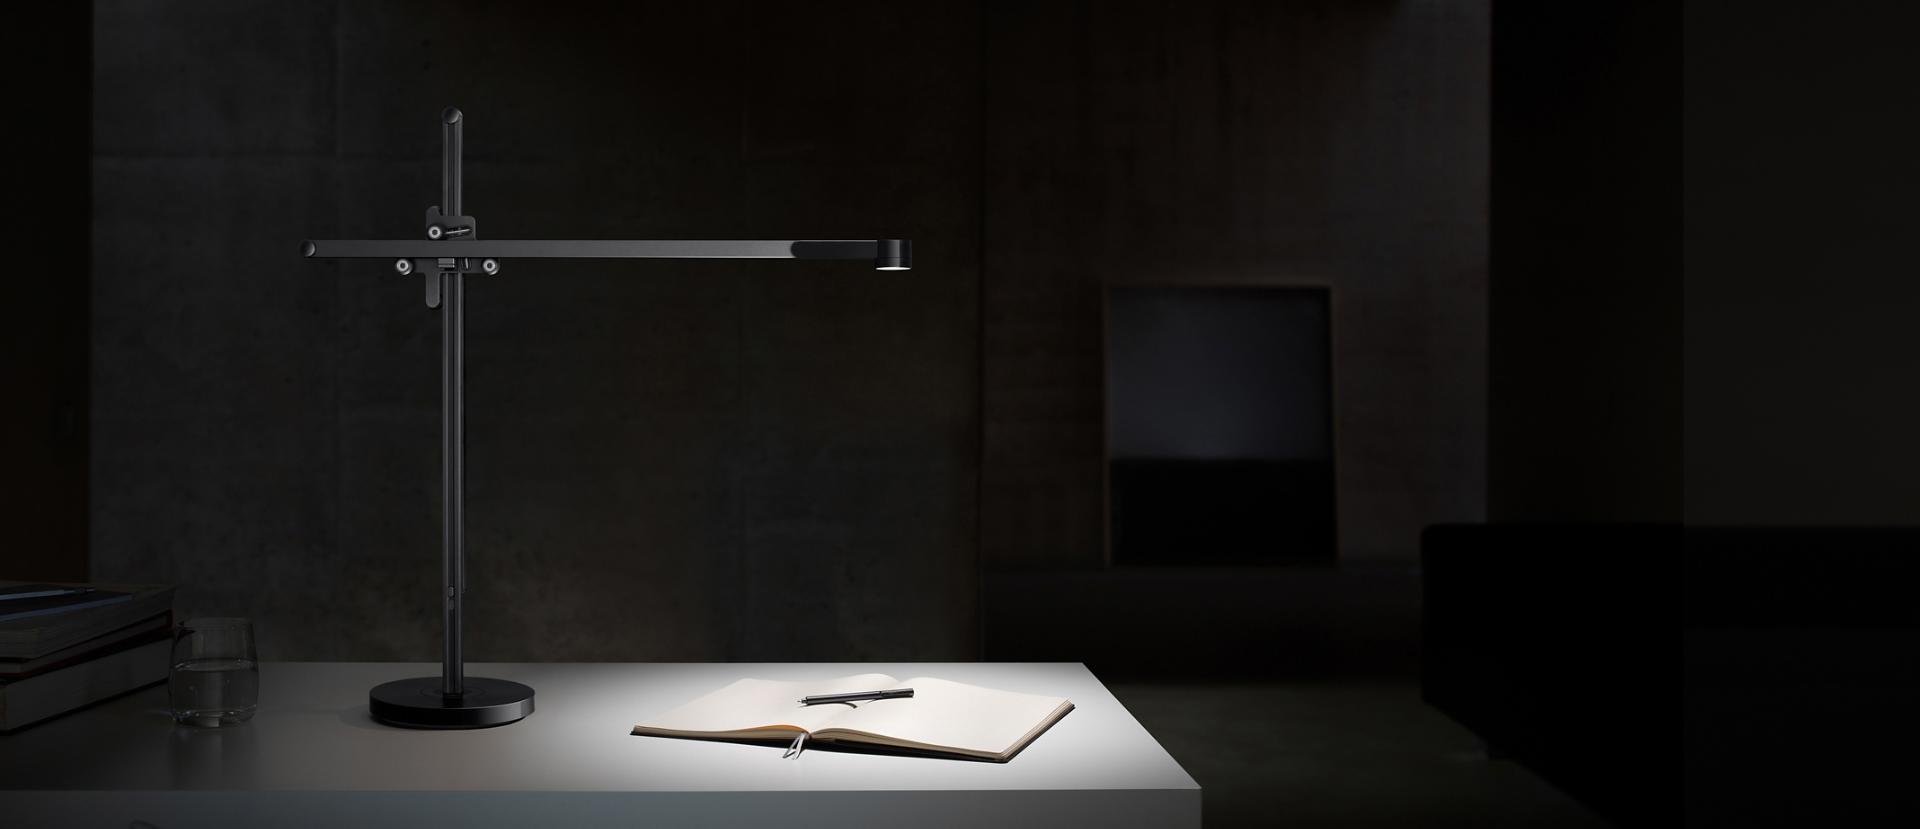 Powerful light from a Dyson CSYS task light shining on a desk